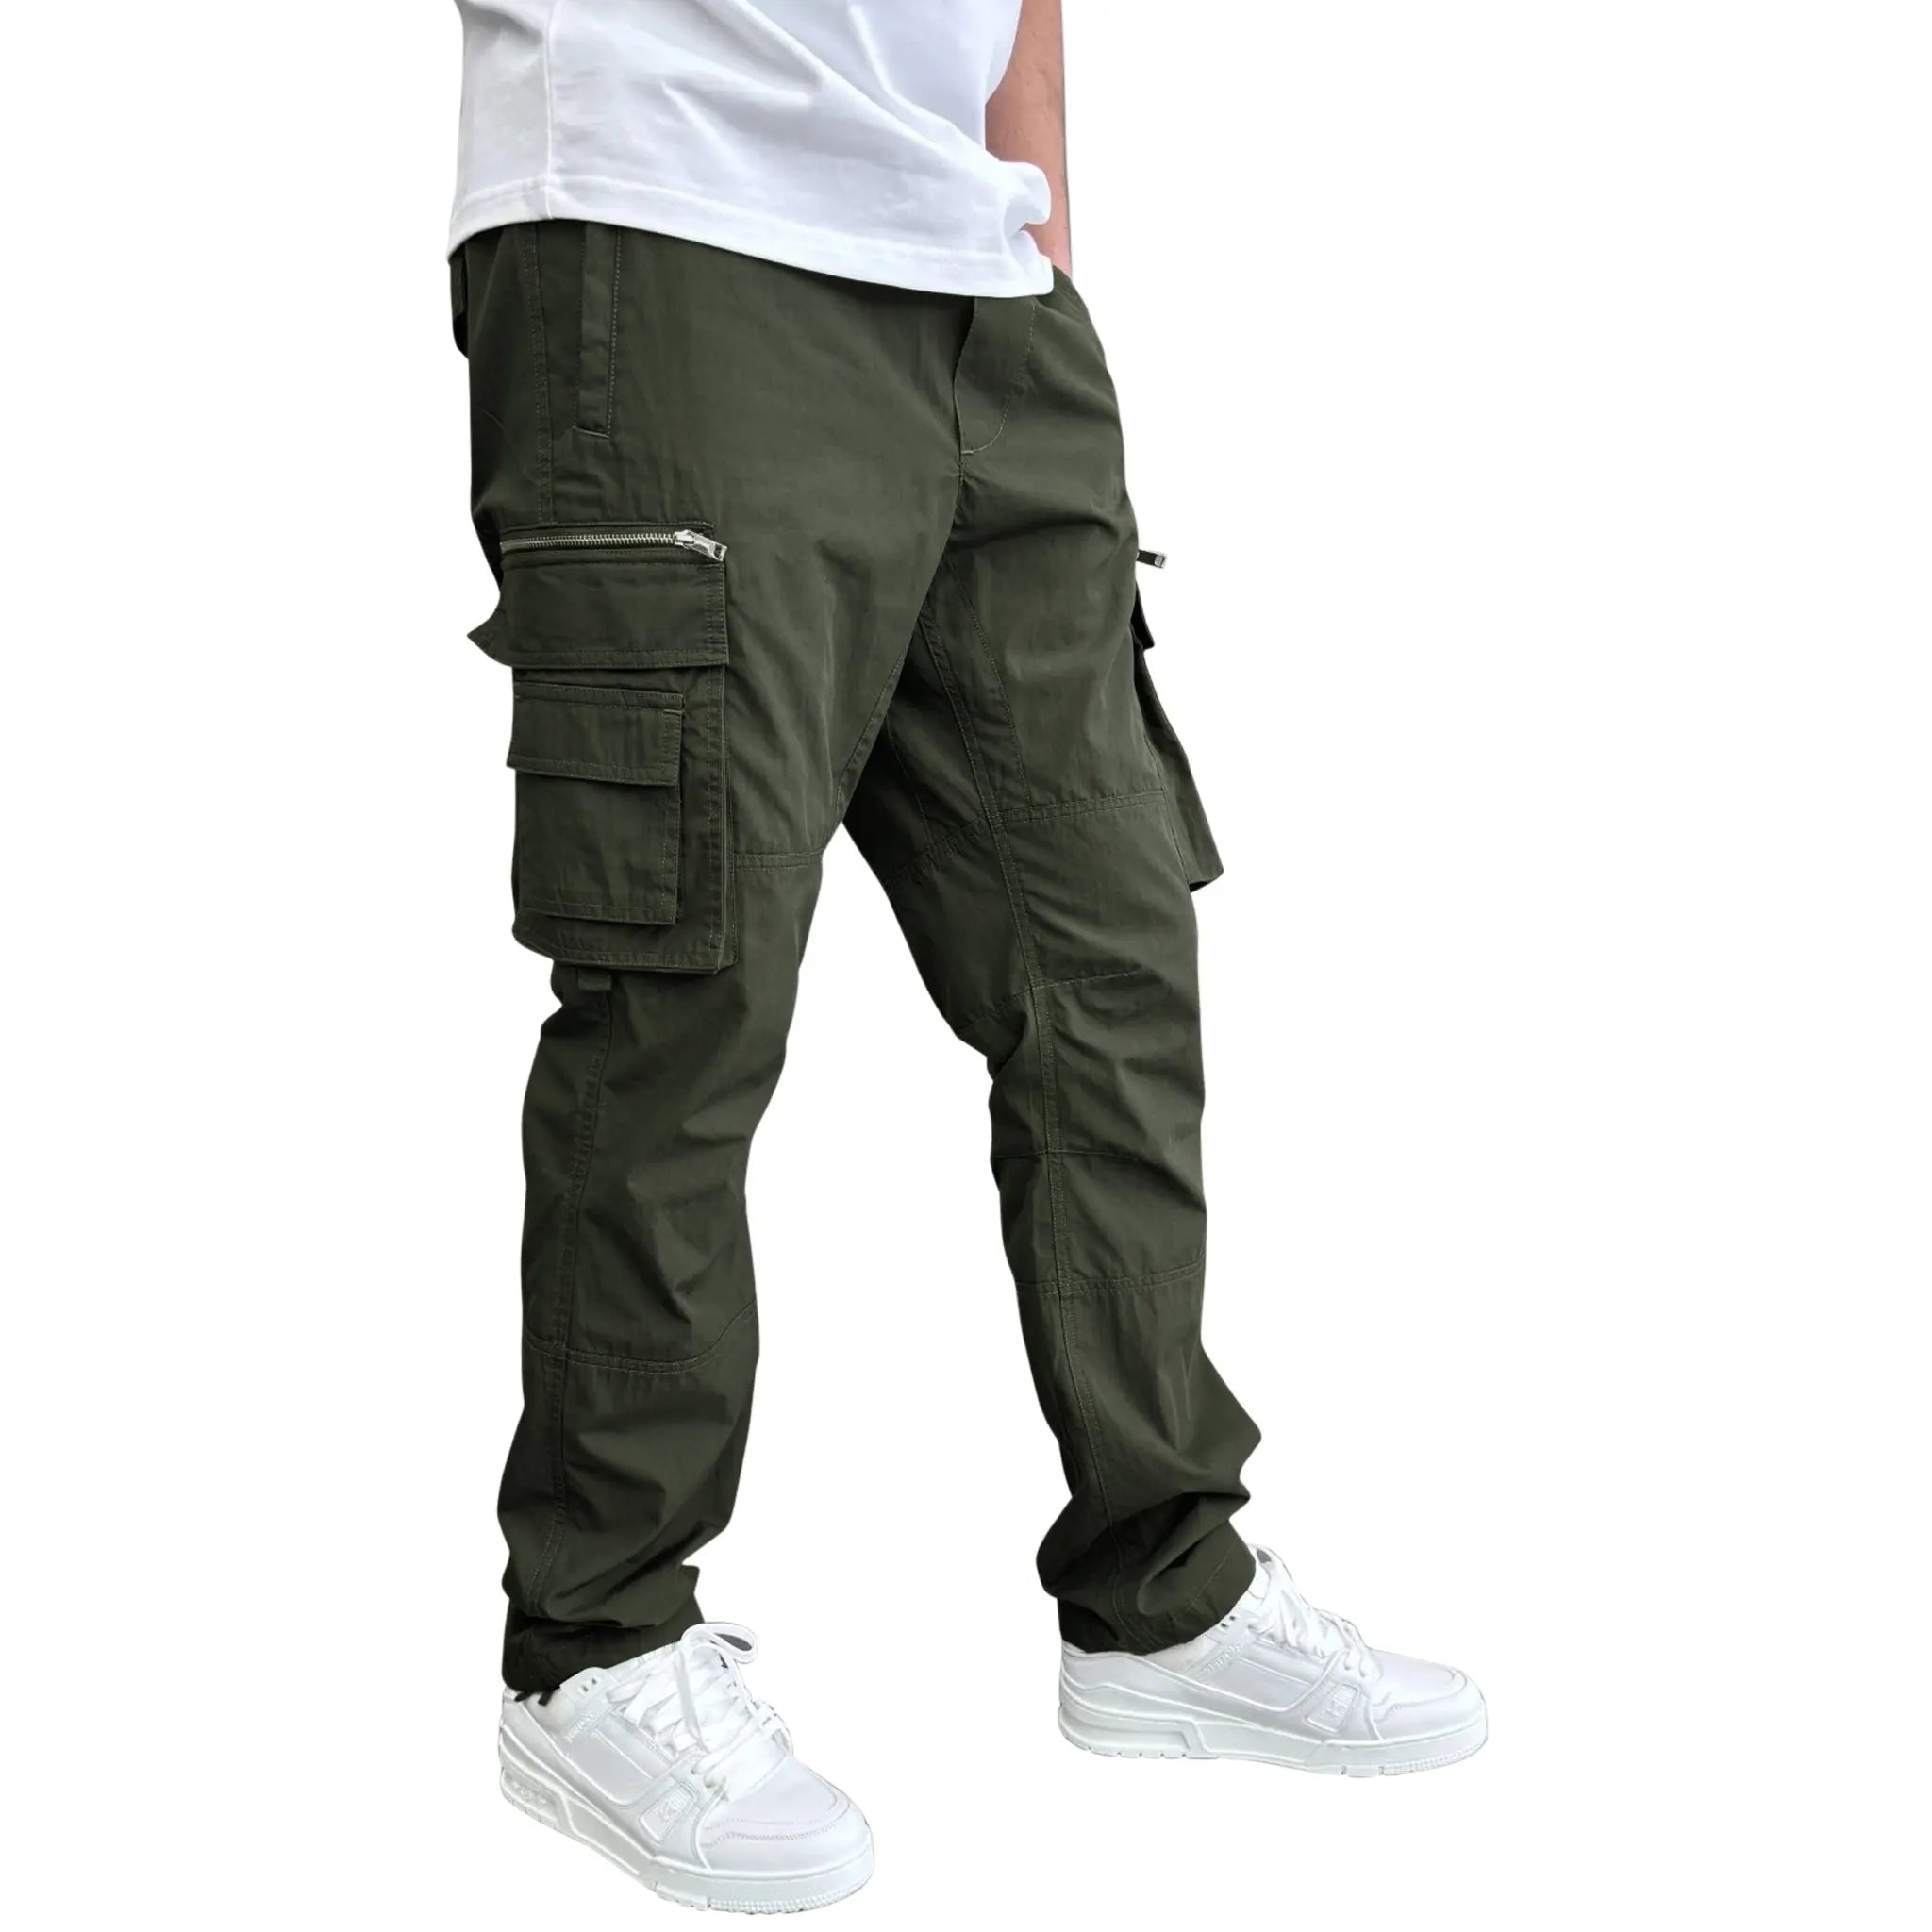 Model side view of SIARR Military Dark Green Cargo Pants